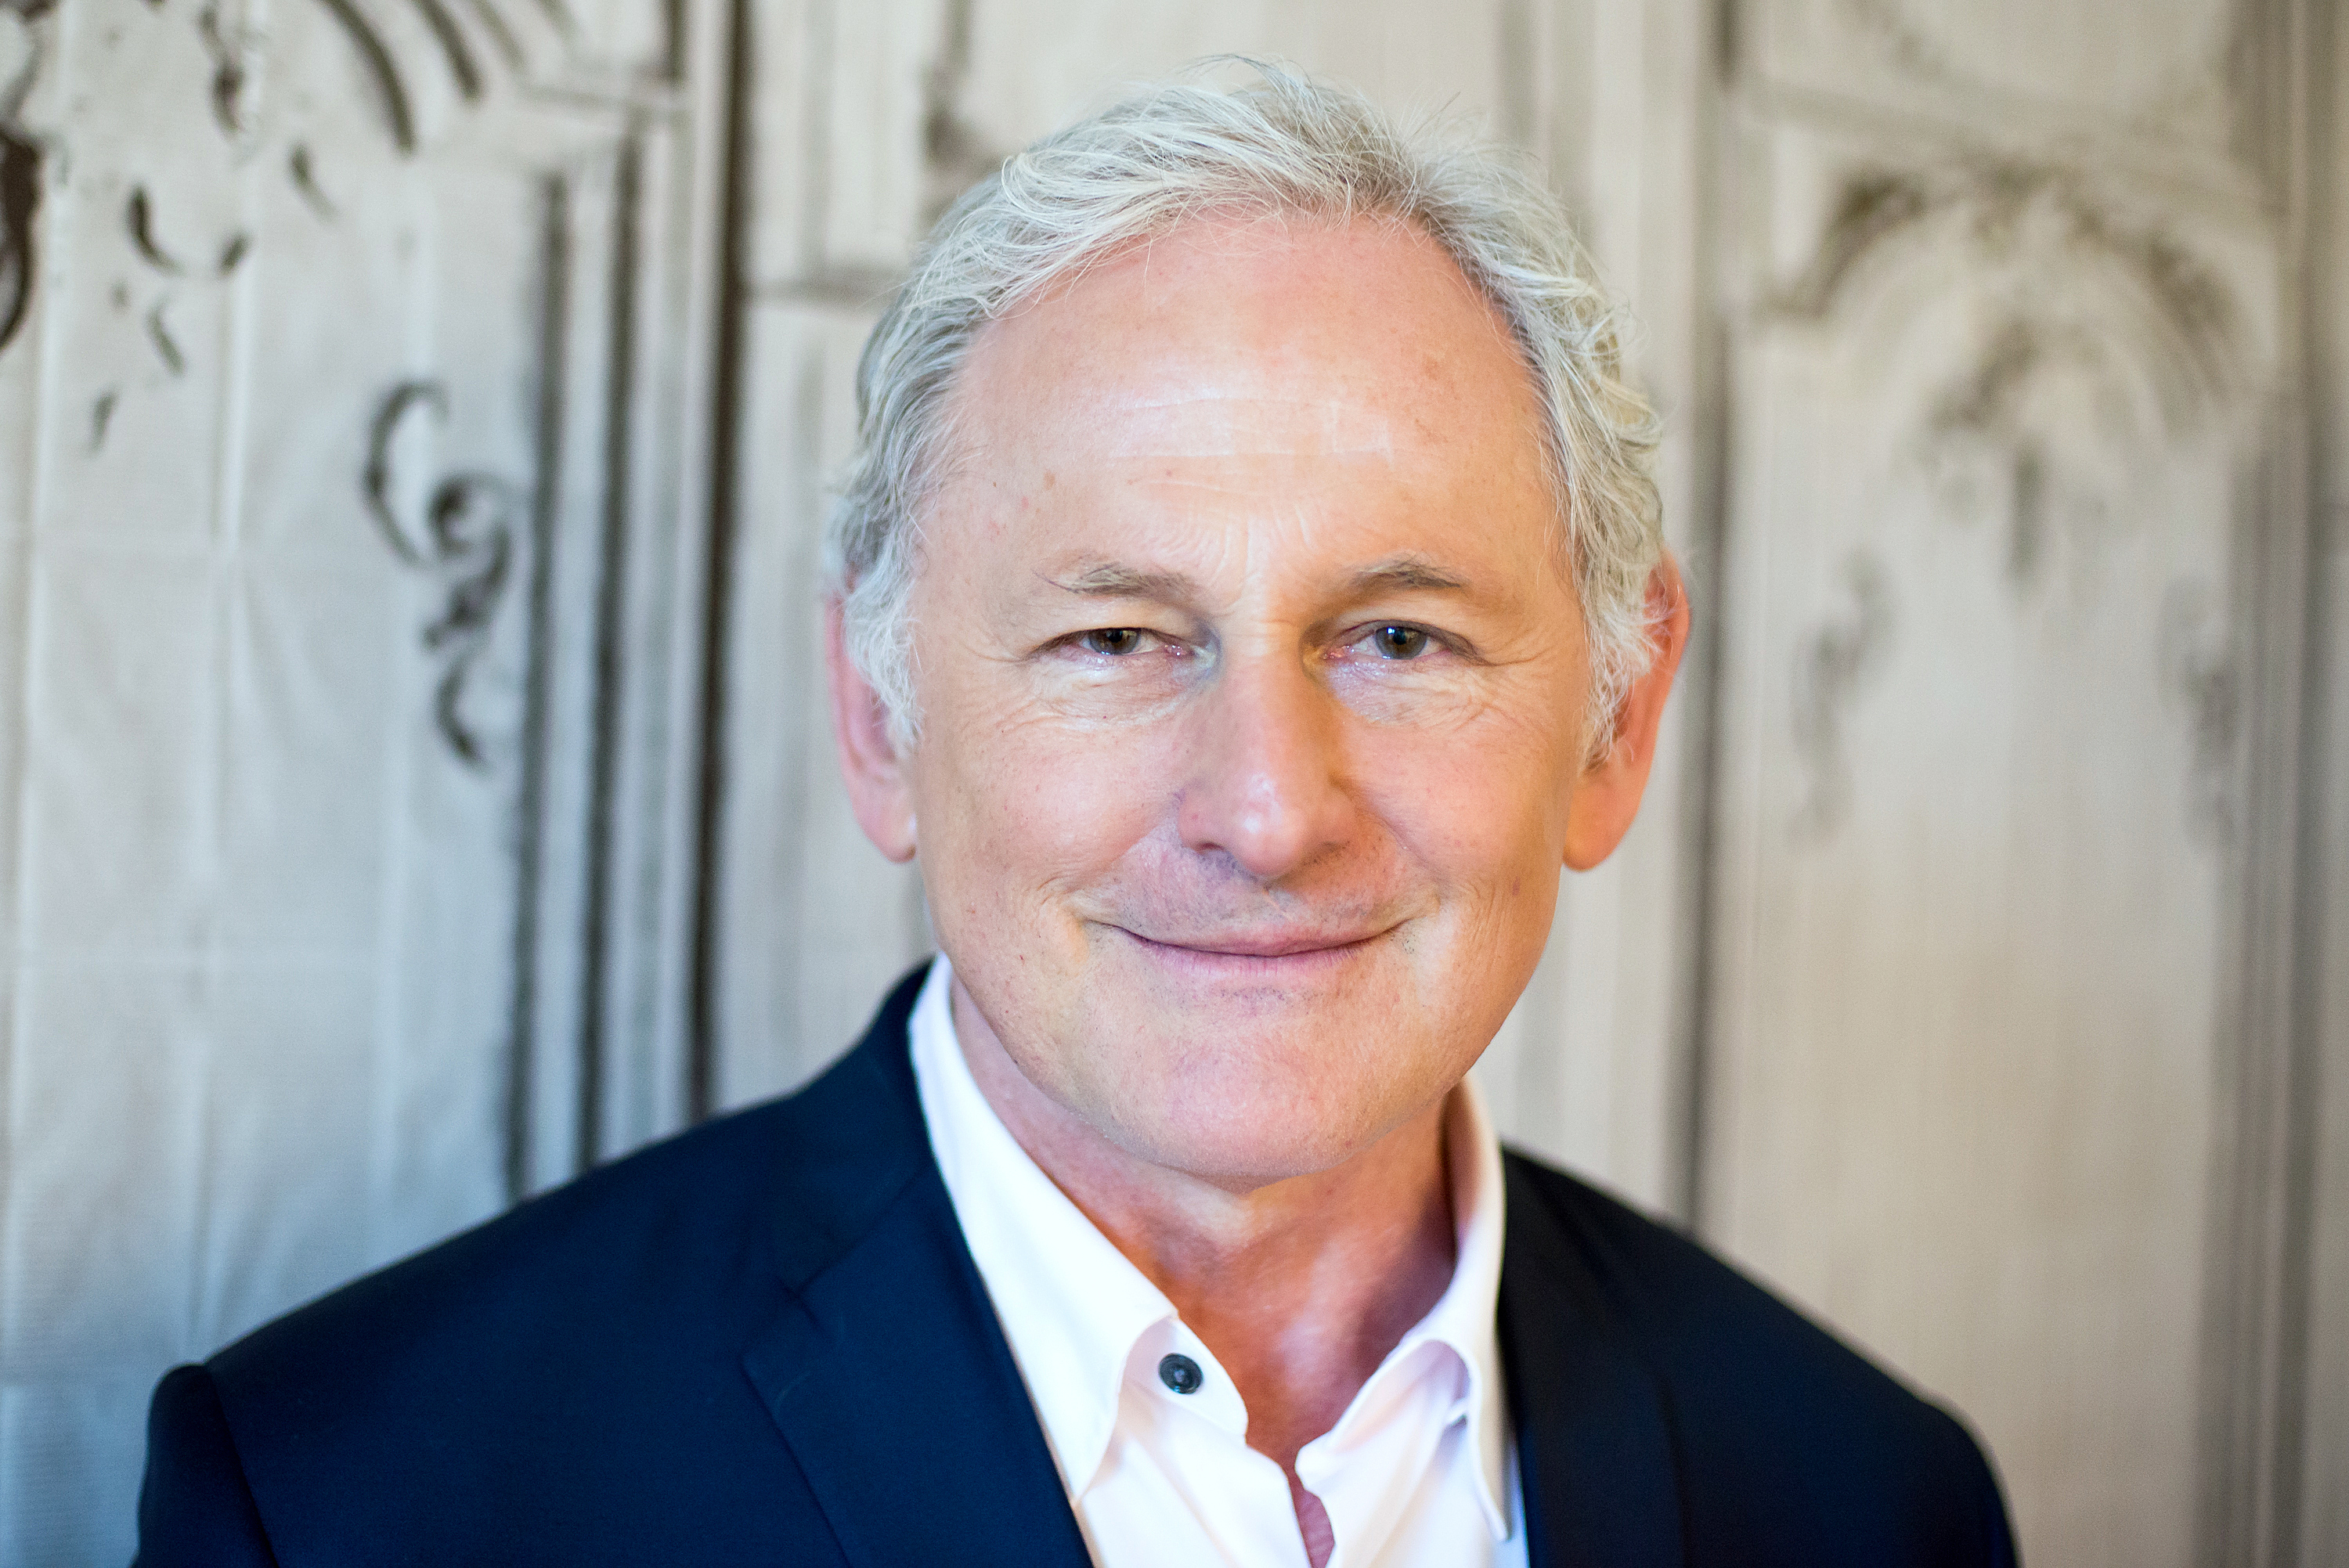 Actor Victor Garber attends the AOL Build Speaker Series at AOL Studios In New York on June 22, 2015 in New York City. (Mike Pont—Getty Images)